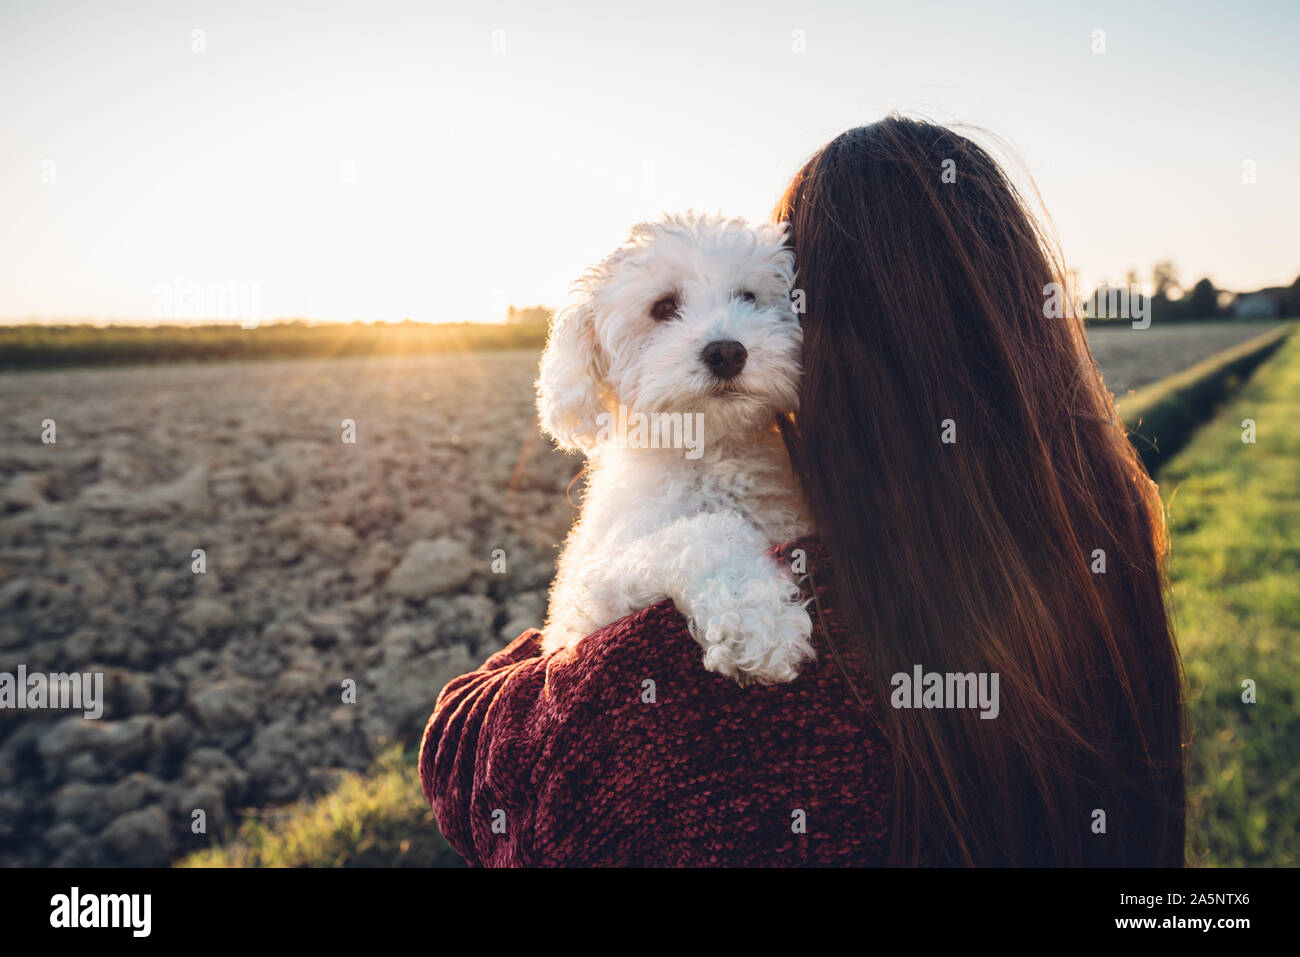 Romantic hug between a white dog and it's owner. Human and animals in love Stock Photo